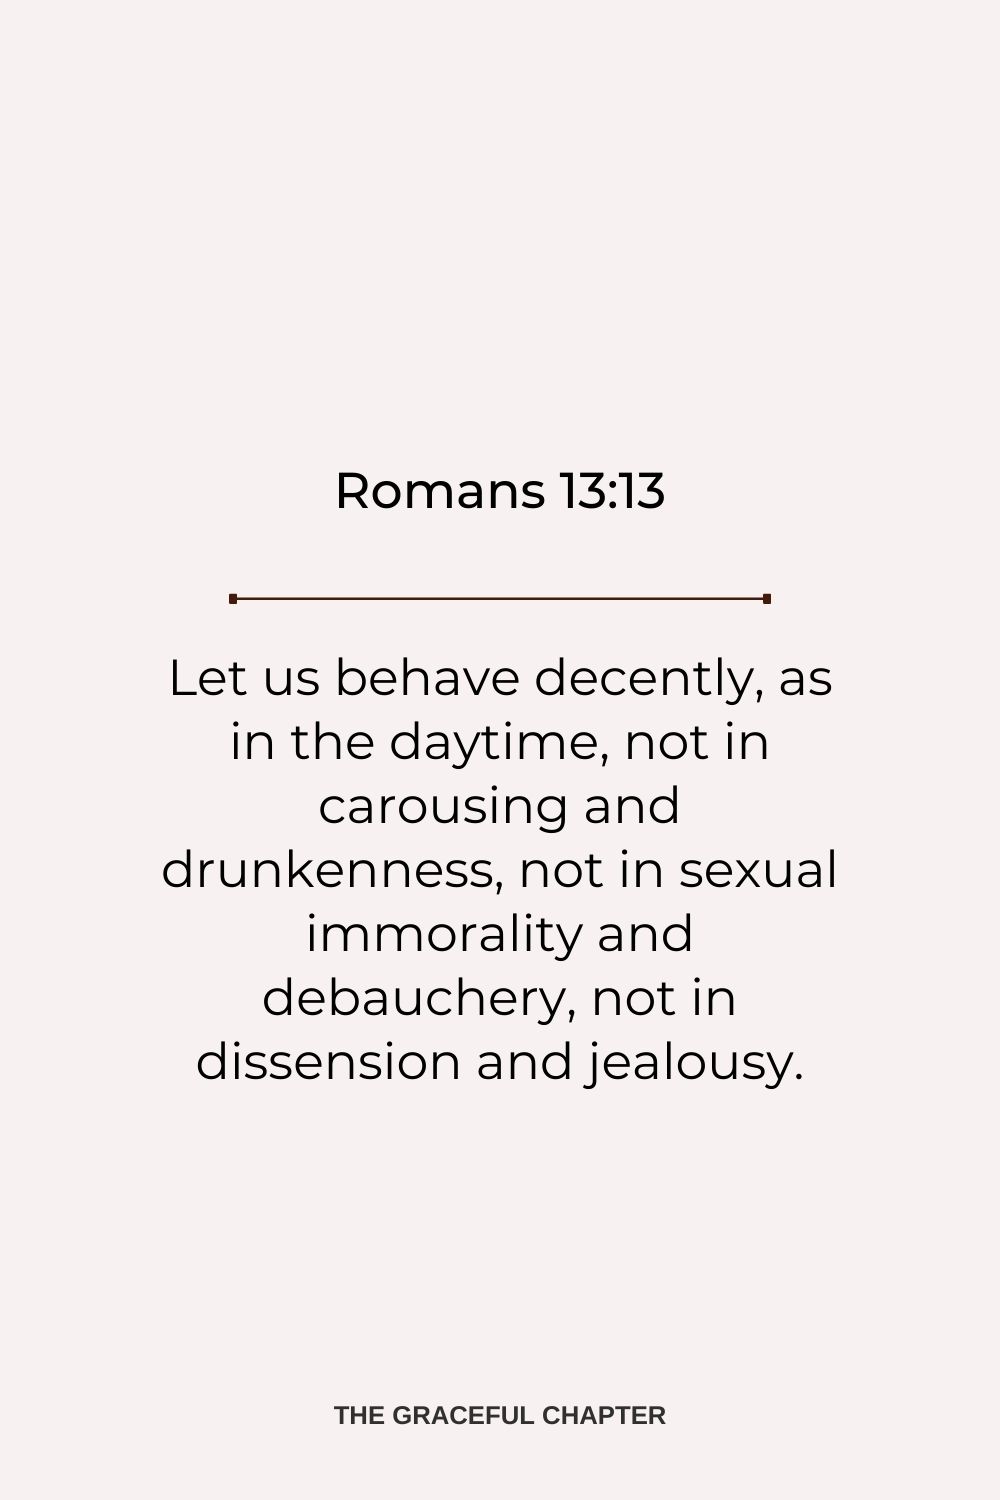 Let us behave decently, as in the daytime, not in carousing and drunkenness, not in sexual immorality and debauchery, not in dissension and jealousy. Romans 13:13